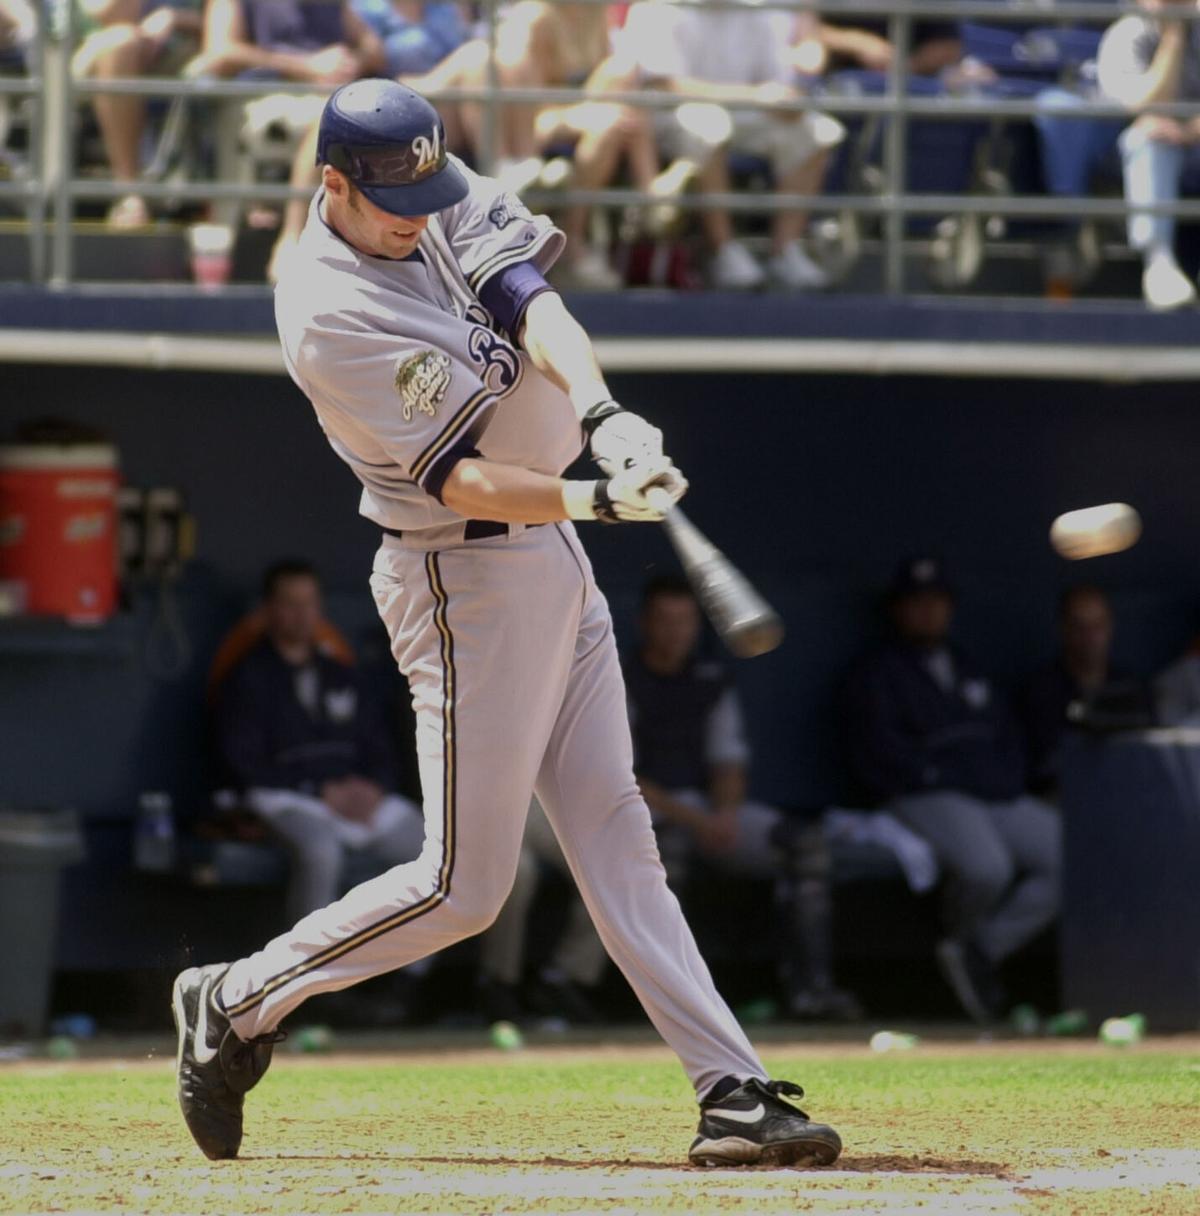 Christian Yelich powers up as Brewers explode to clinch playoff berth 